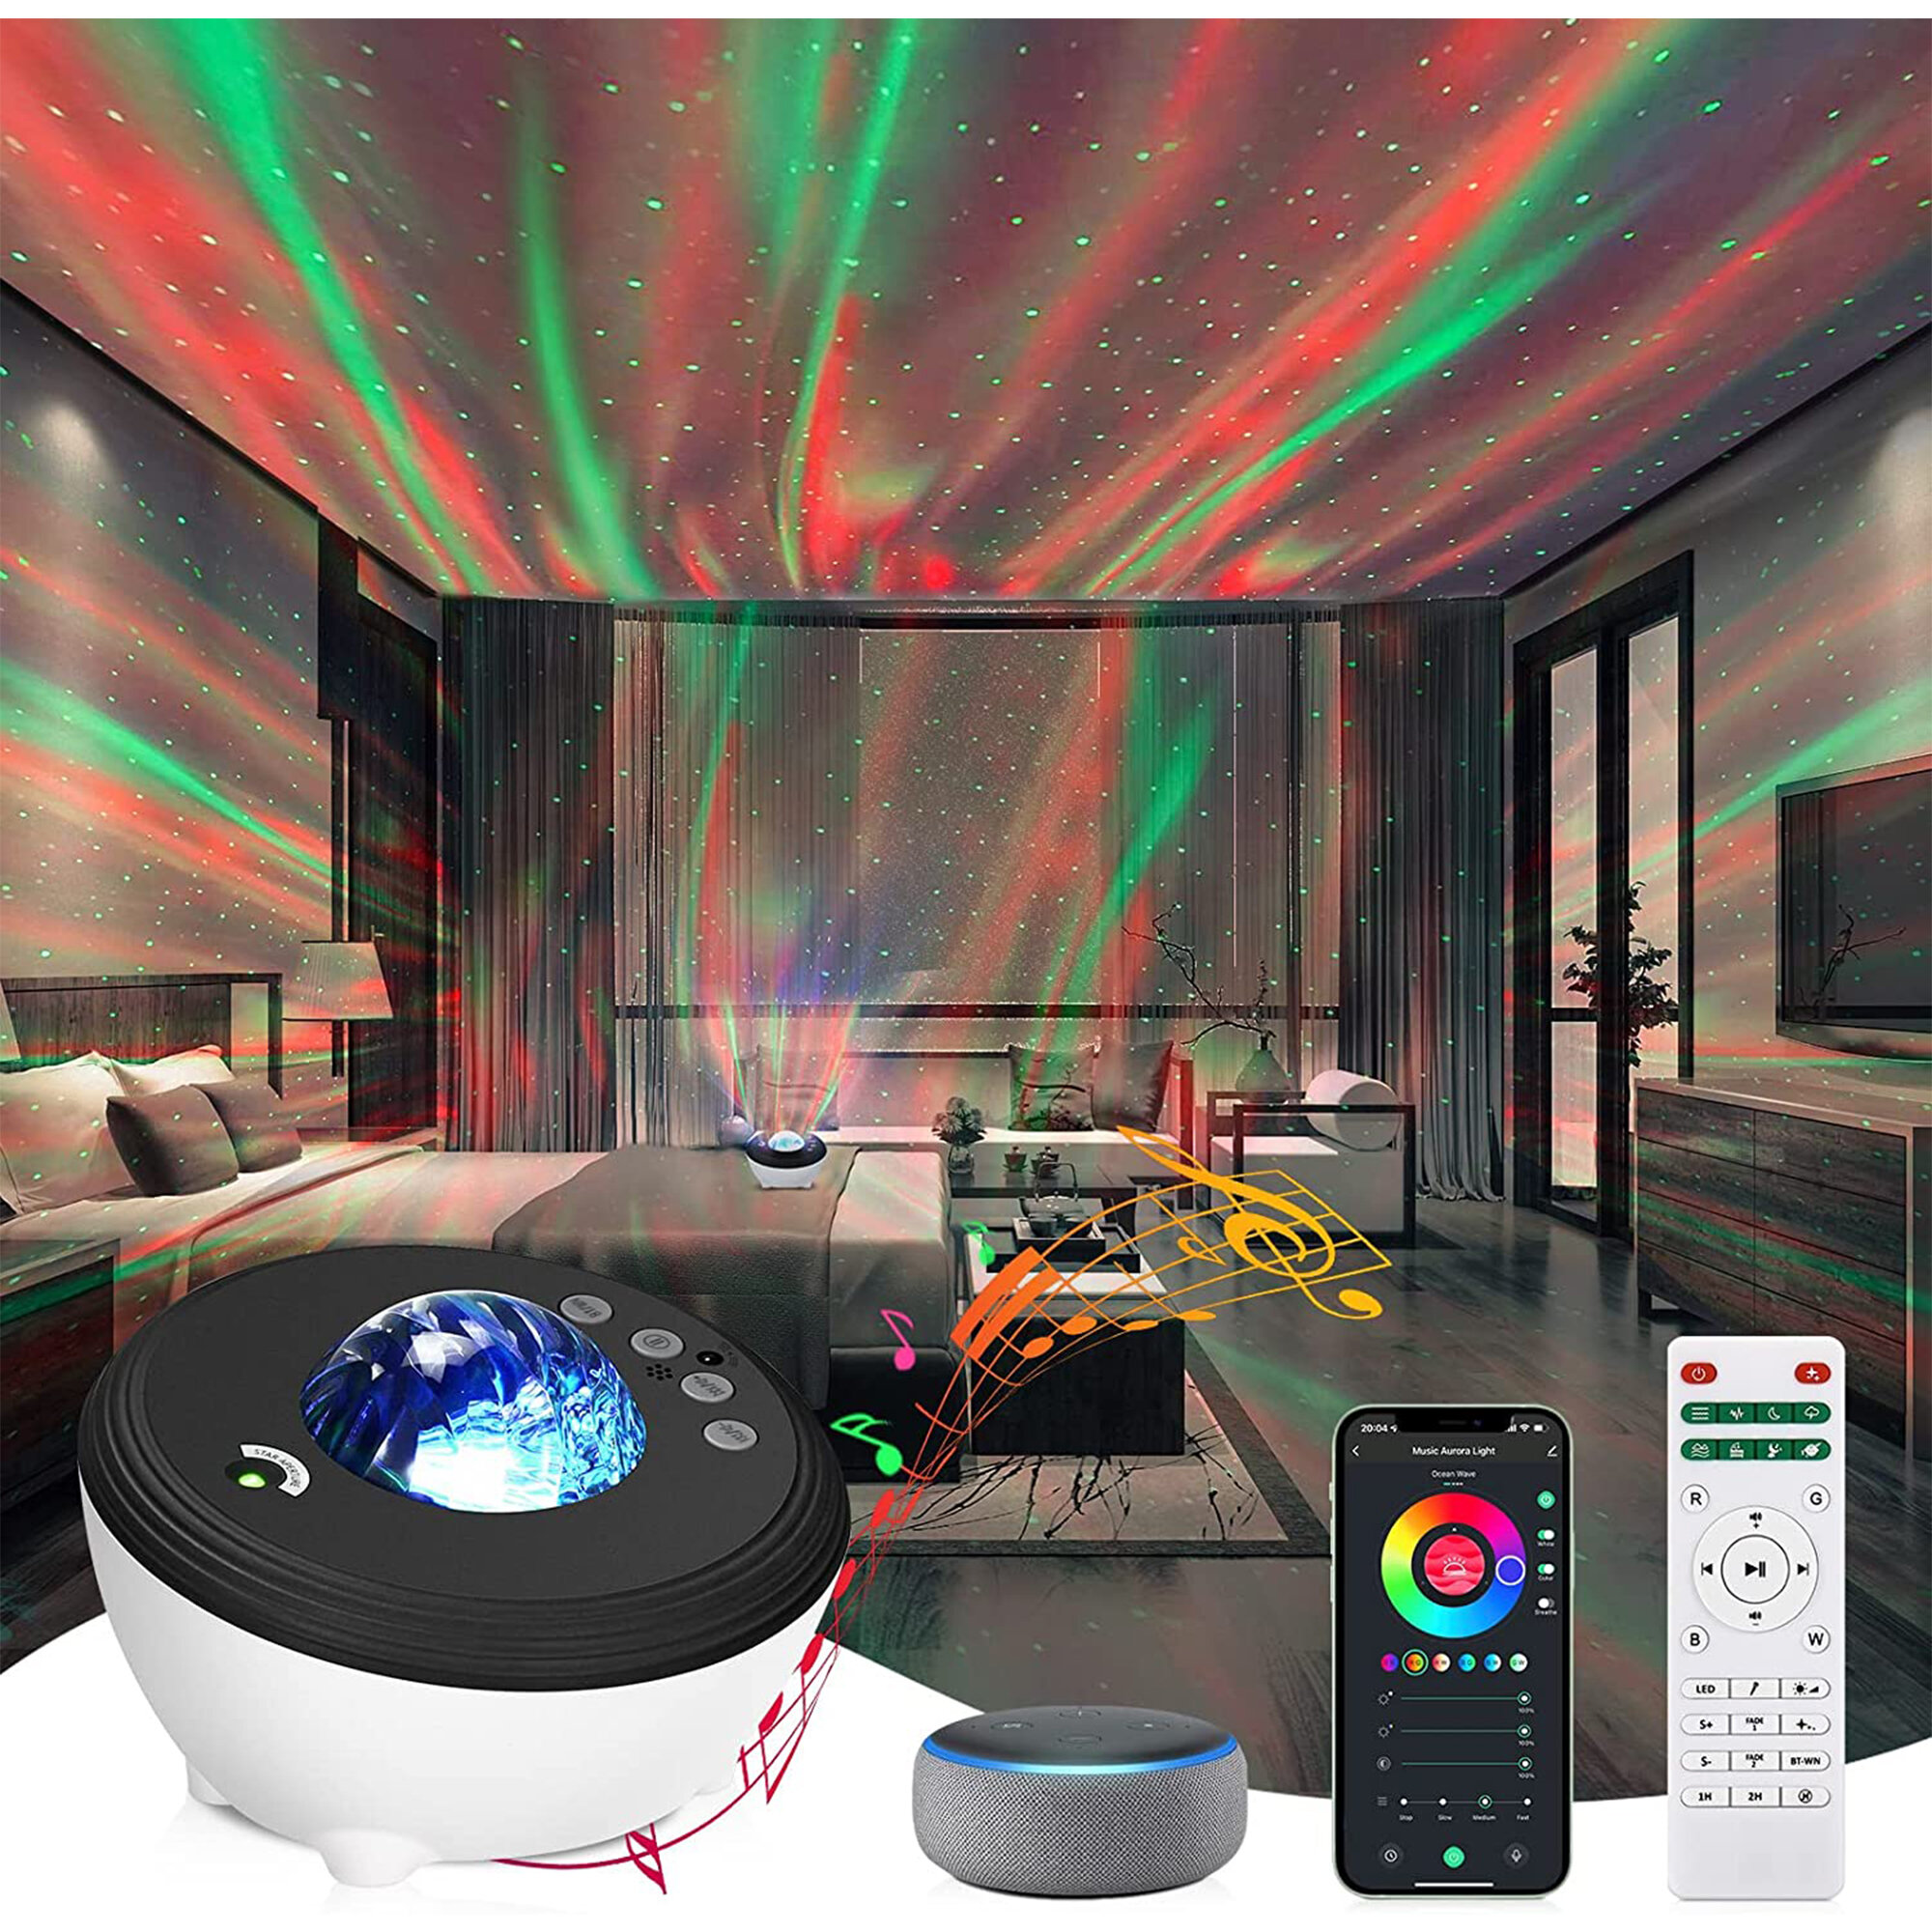 Star Projector, Galaxy Projector With App Voice Control Light Modes, White Noise Bluetooth Speaker, Night Light Projector For Kids Adults Bedroom, Gaming Room, Ceiling, Room Decor | Wayfair